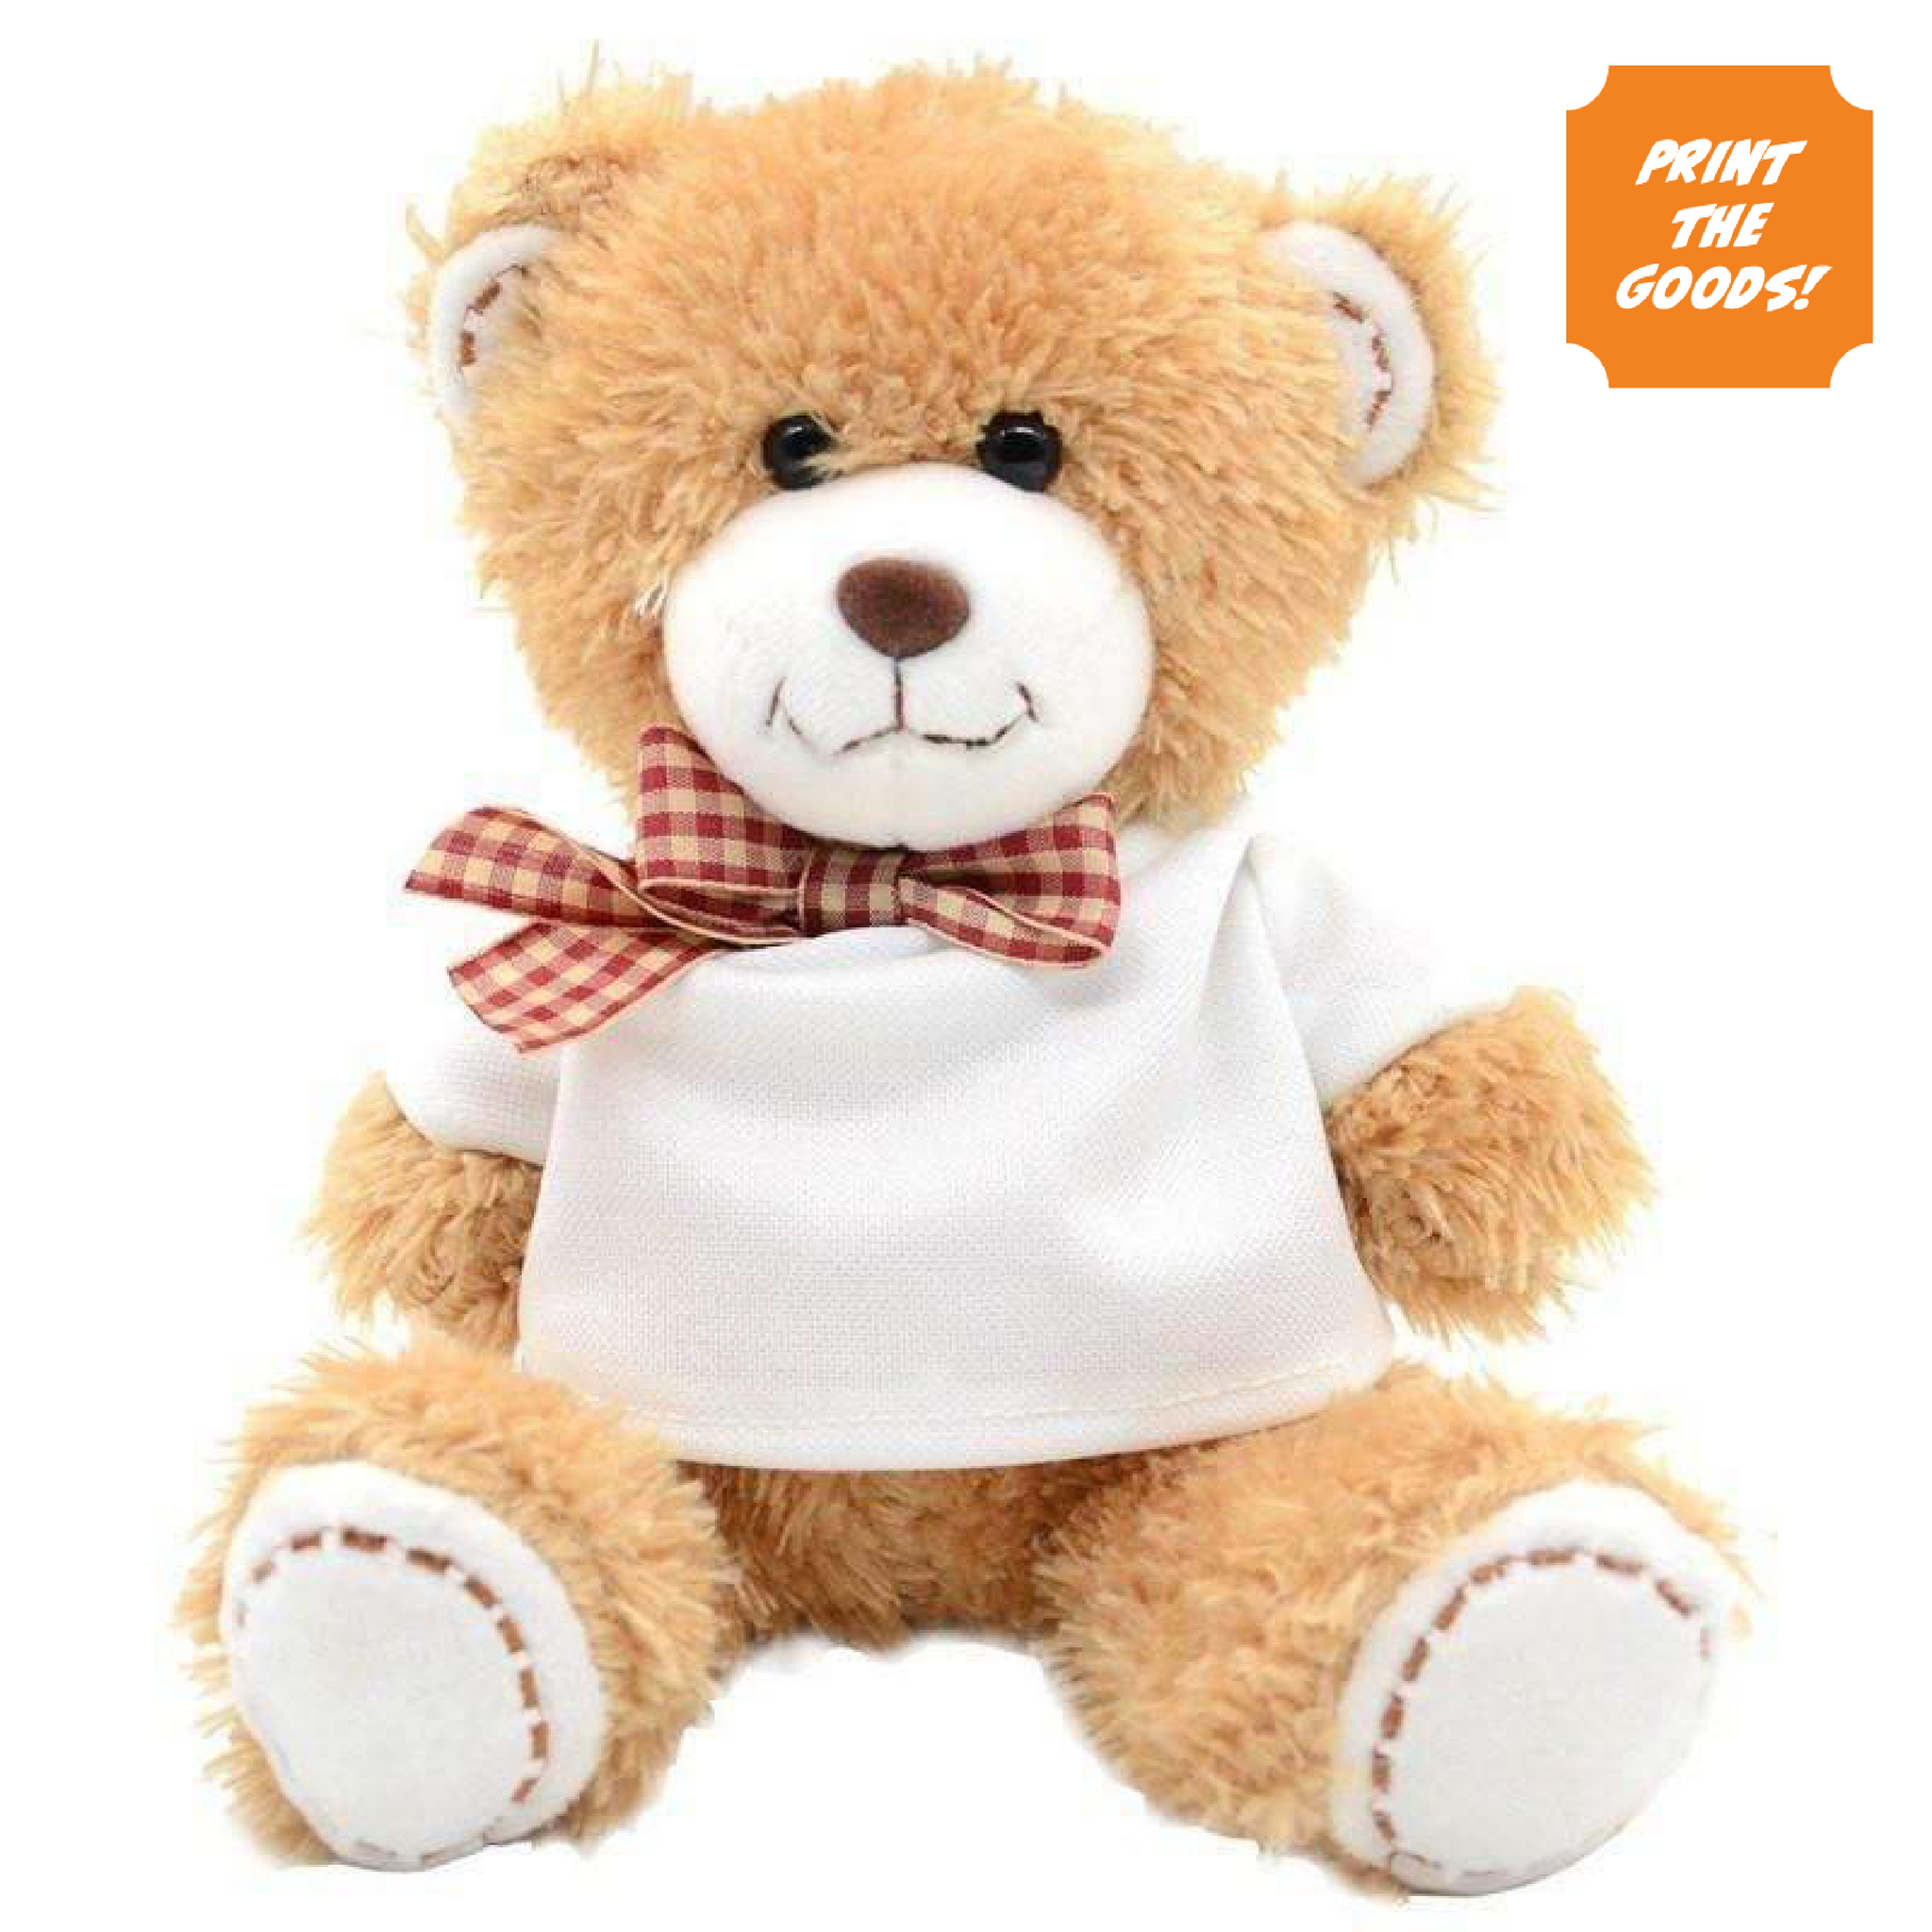 Cute Teddy bear - Upload your image on T - Shirt